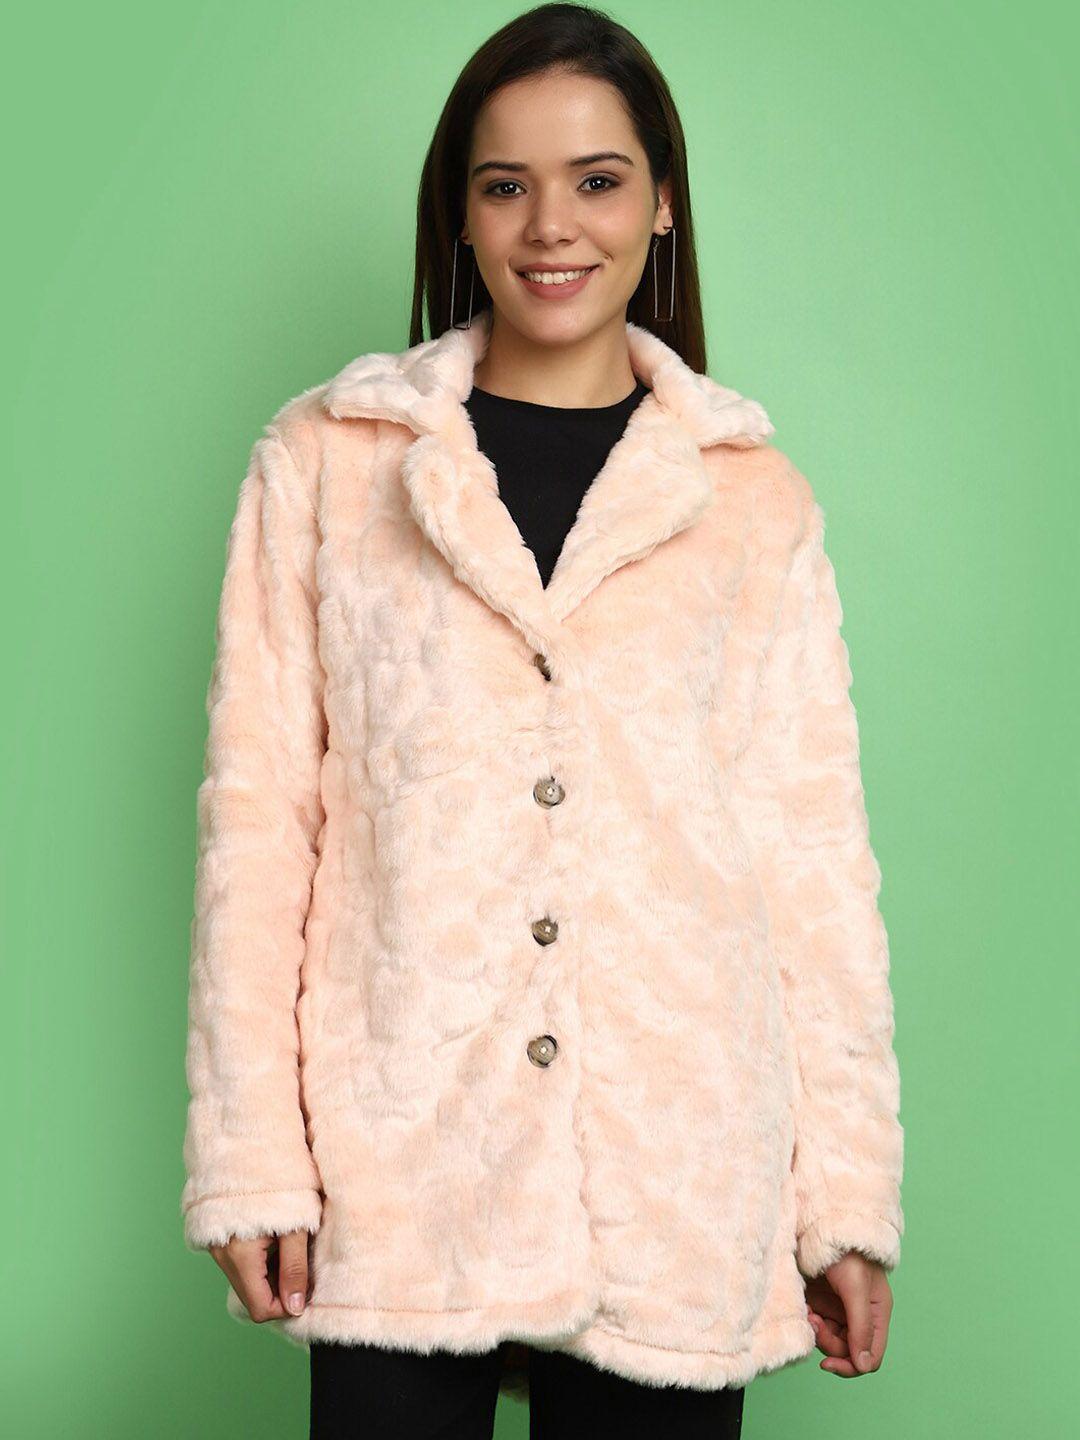 v-mart lightweight lapel collar cotton tailored jacket with faux fur trim